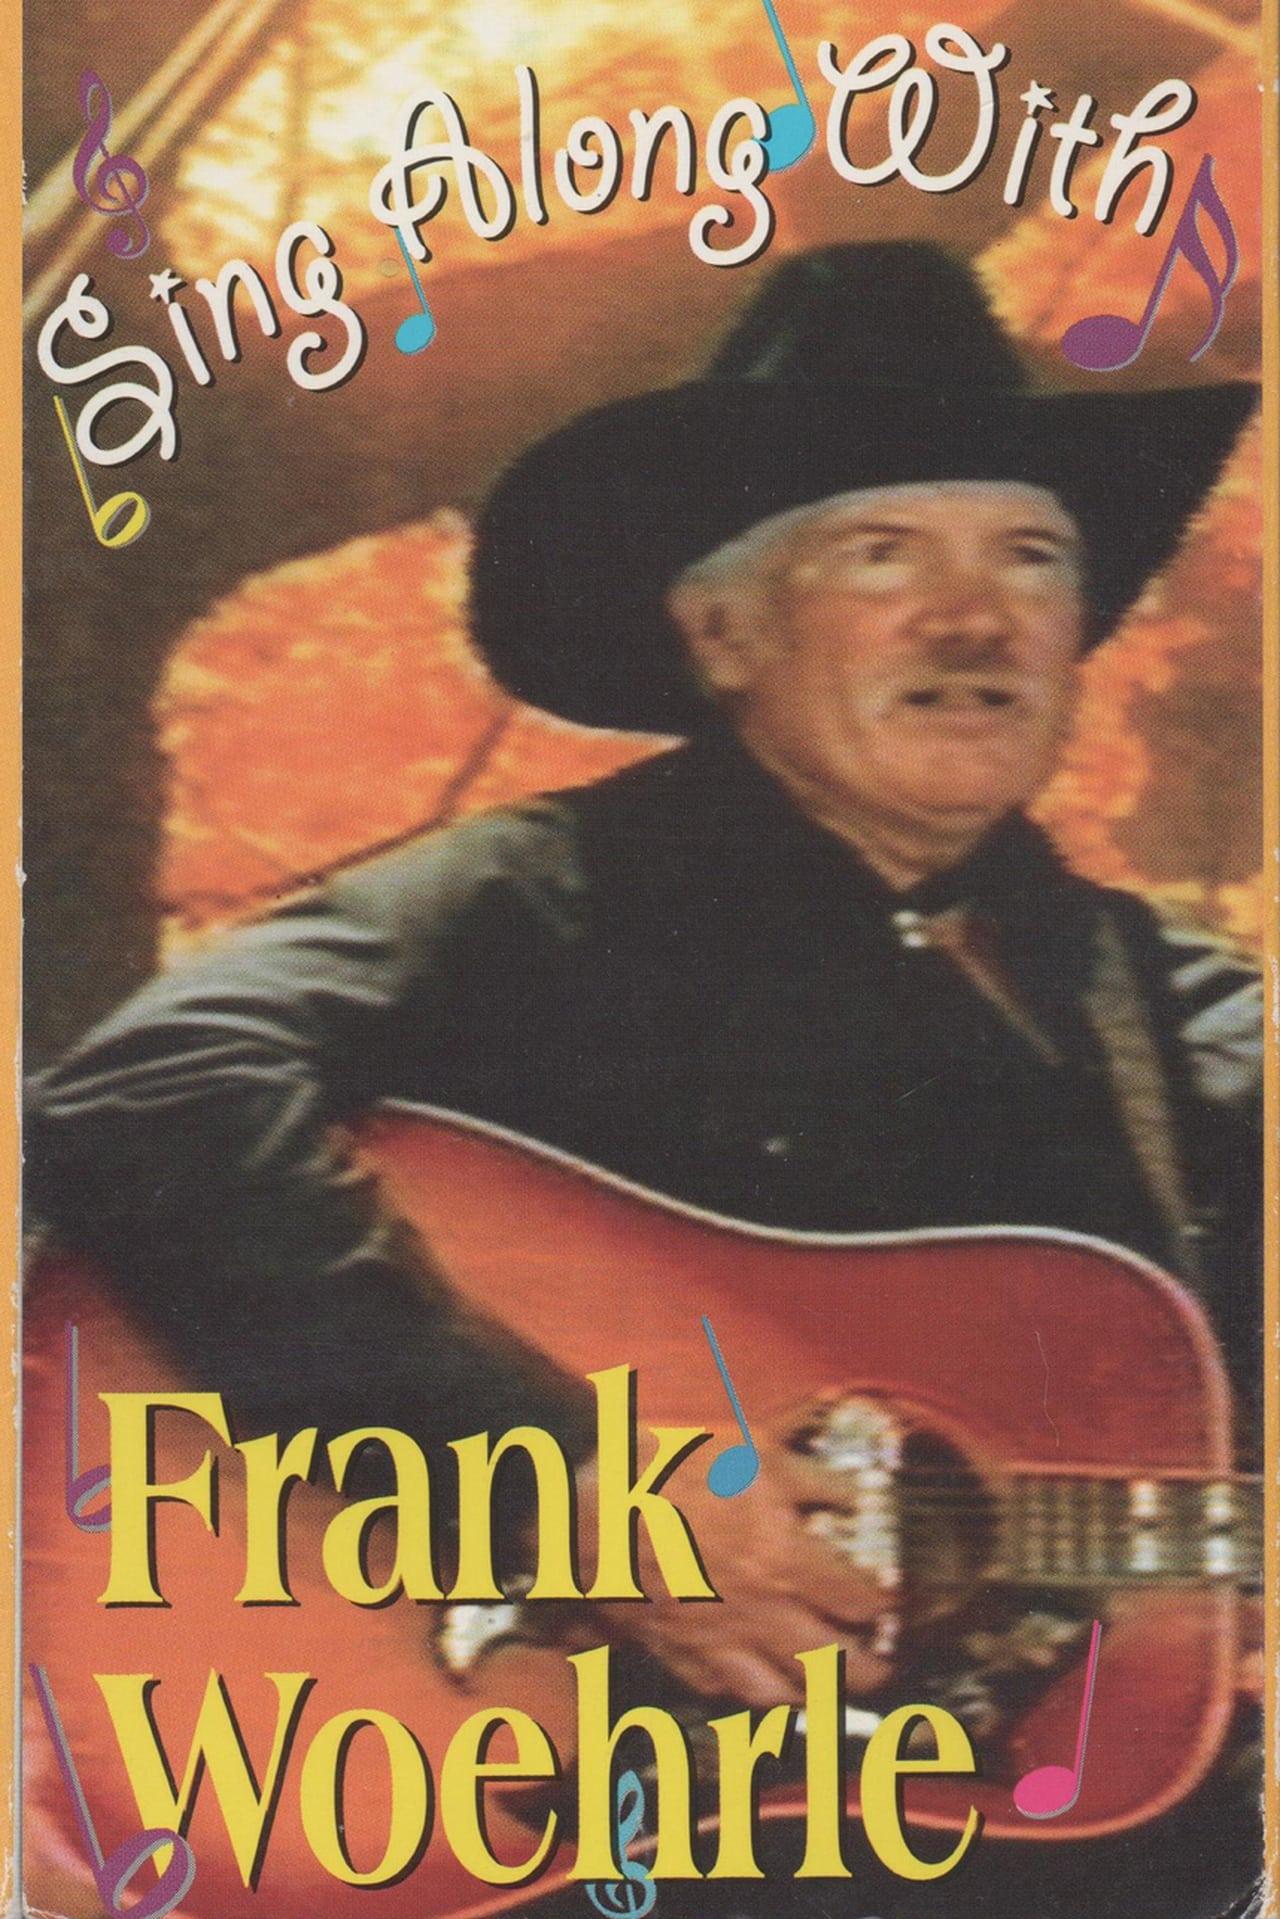 Sing Along With Frank Woehrle poster